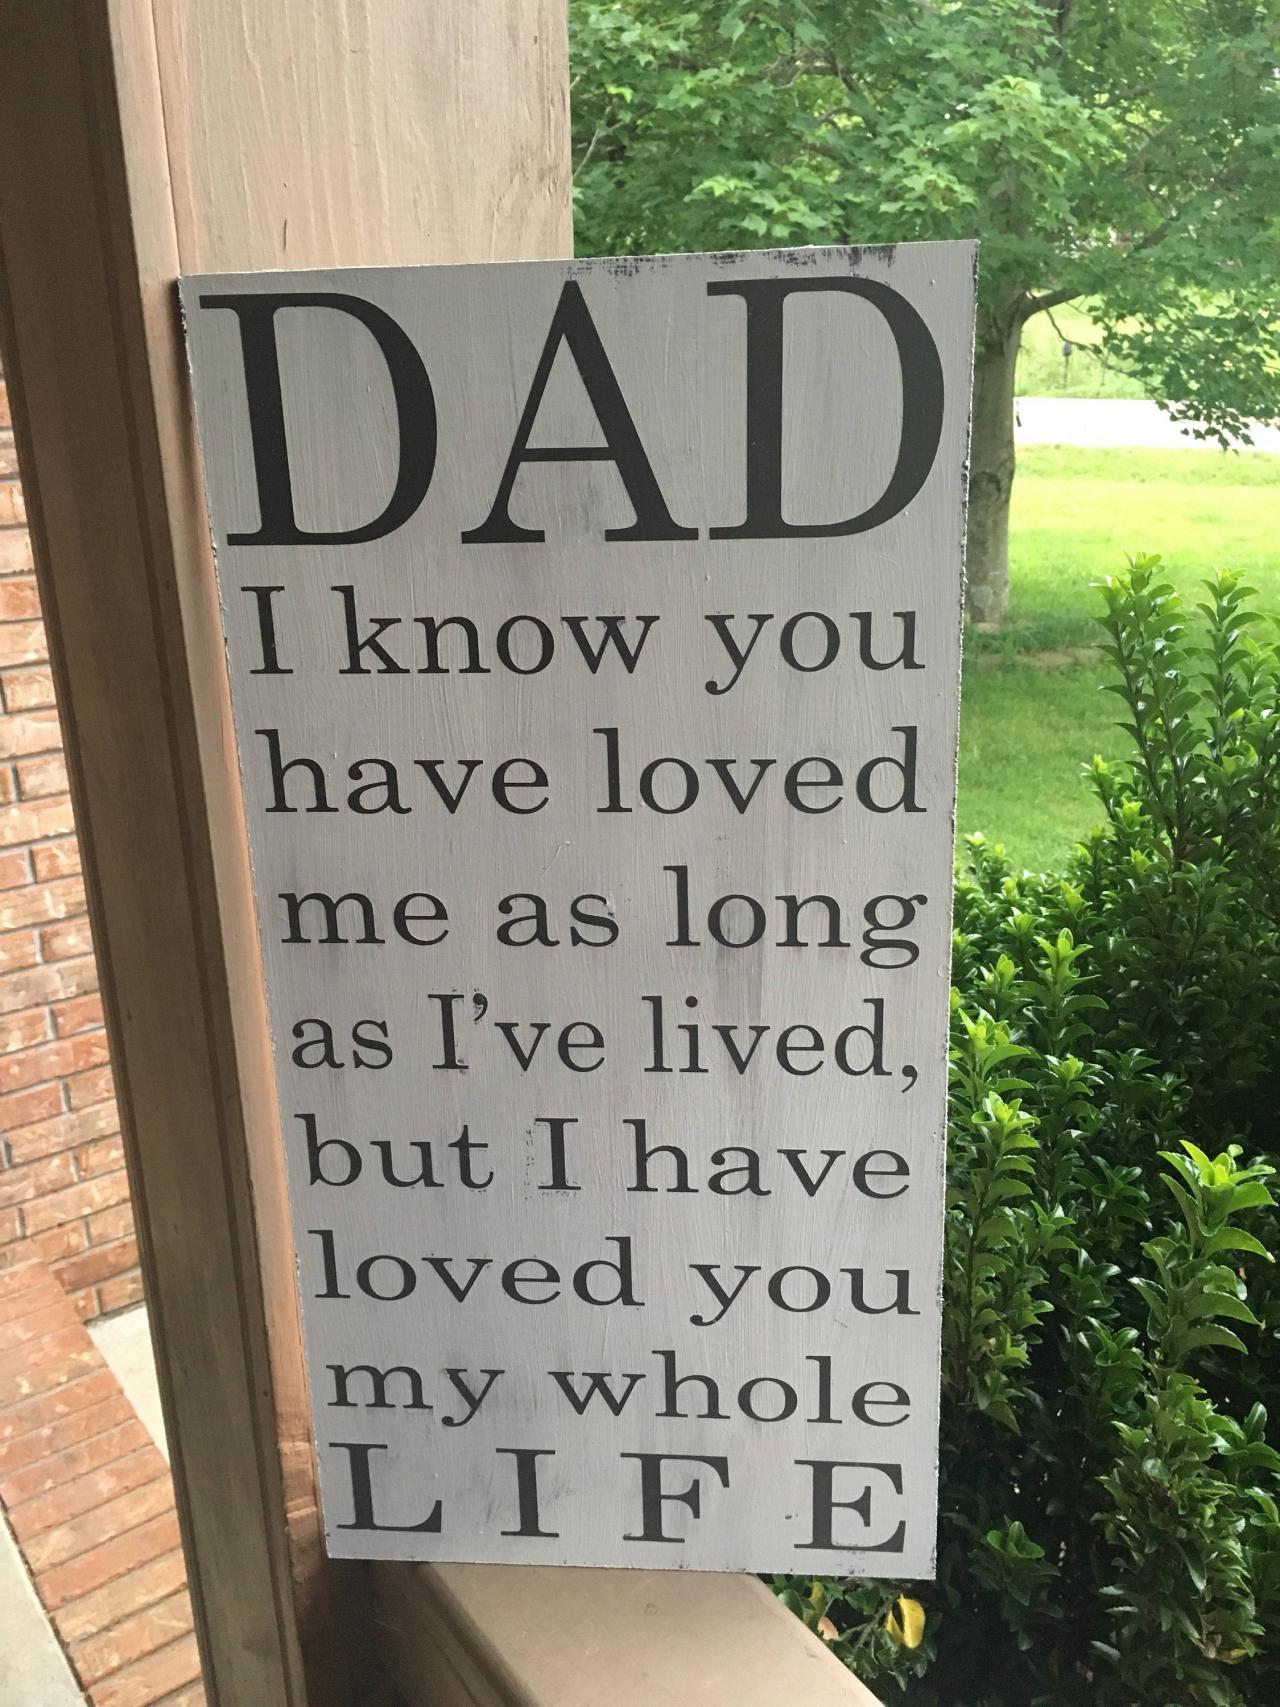 Dad I Know You Have Loved Me As Long As I've Lived , But I Have Loved You My Whole Life 12x24 Hand Painted Wood Sign